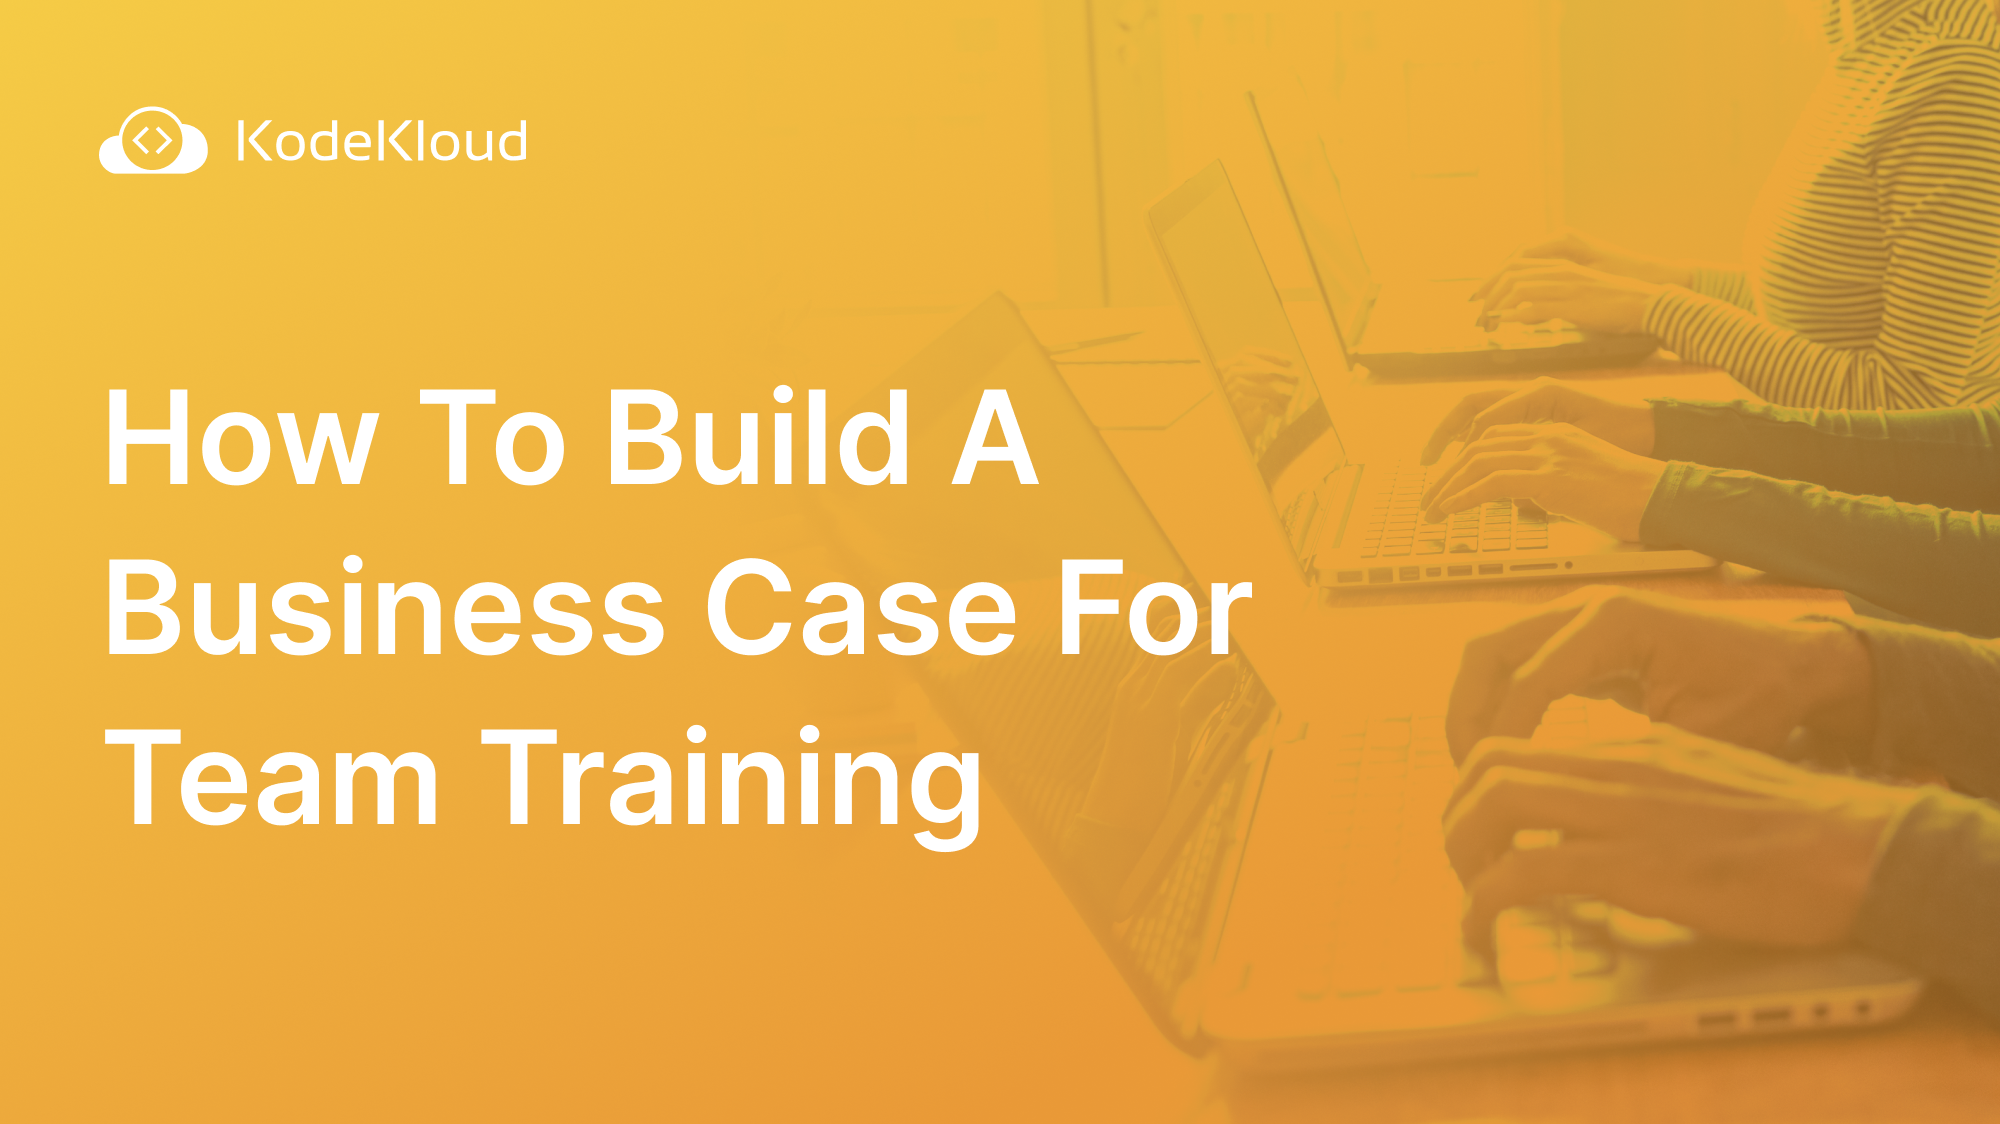 How To Build A Business Case For Team Training